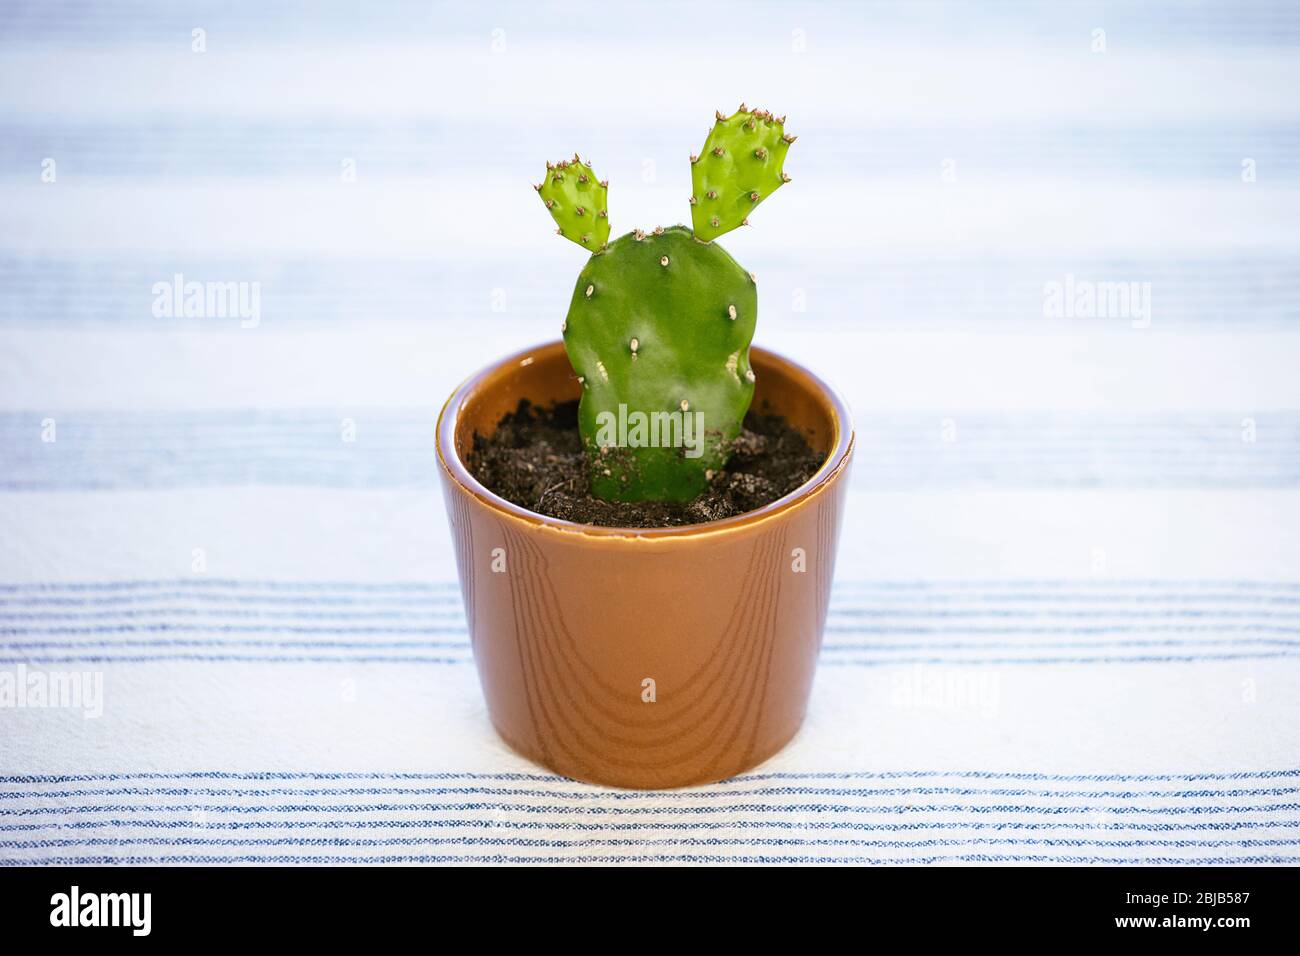 Mini cactus. Small opuntia ficus-indica, prickly pear or Indian fig. Cute cacti house plant. Stock Photo